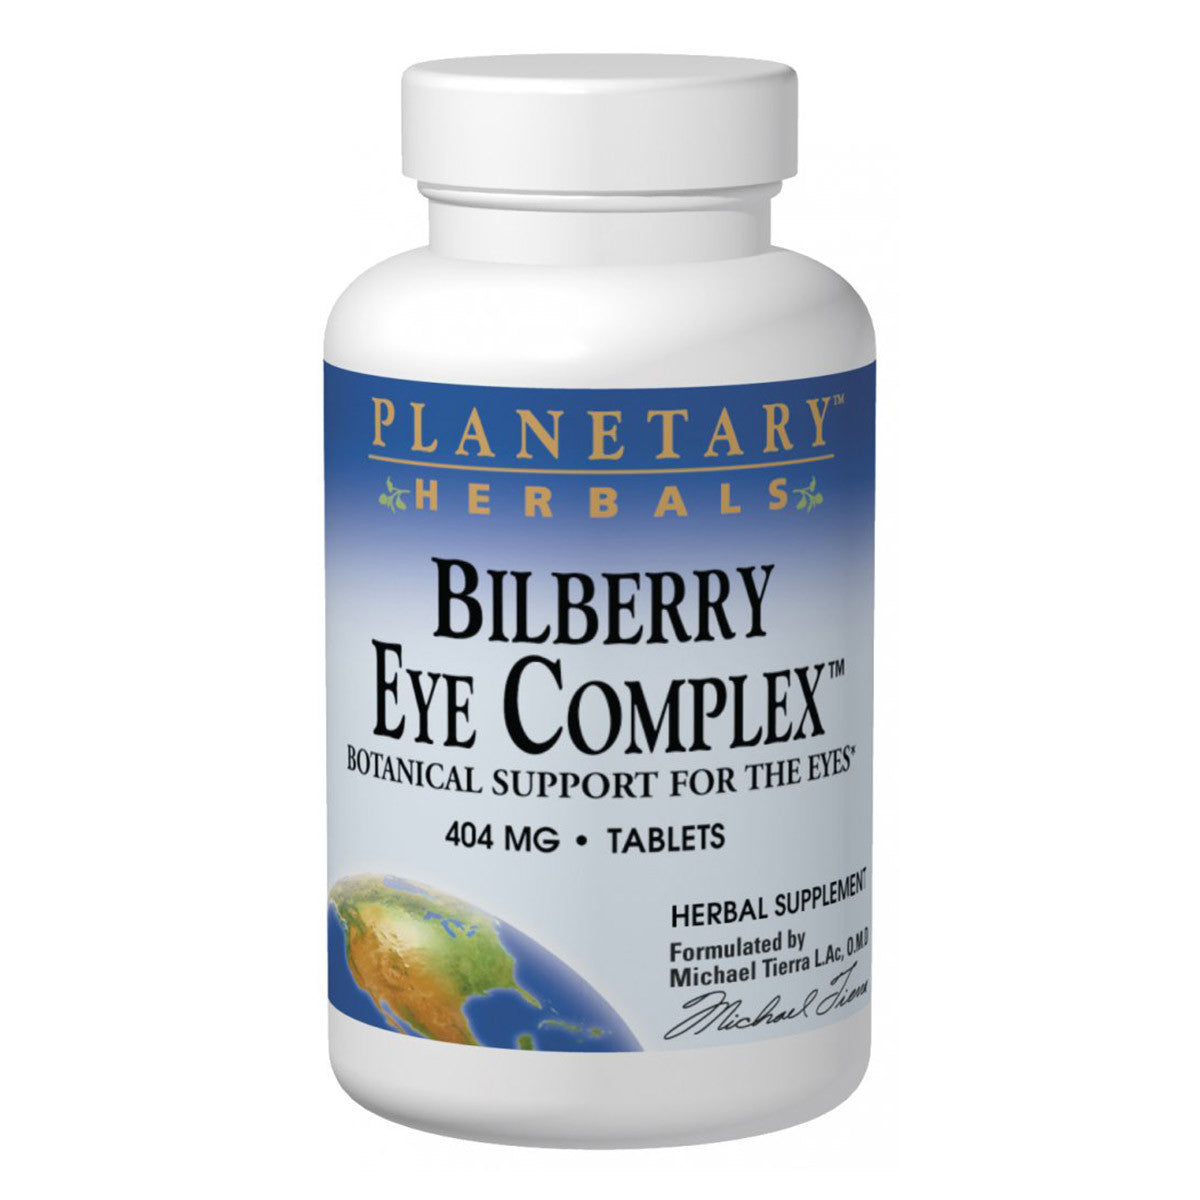 Primary image of Bilberry Eye Complex